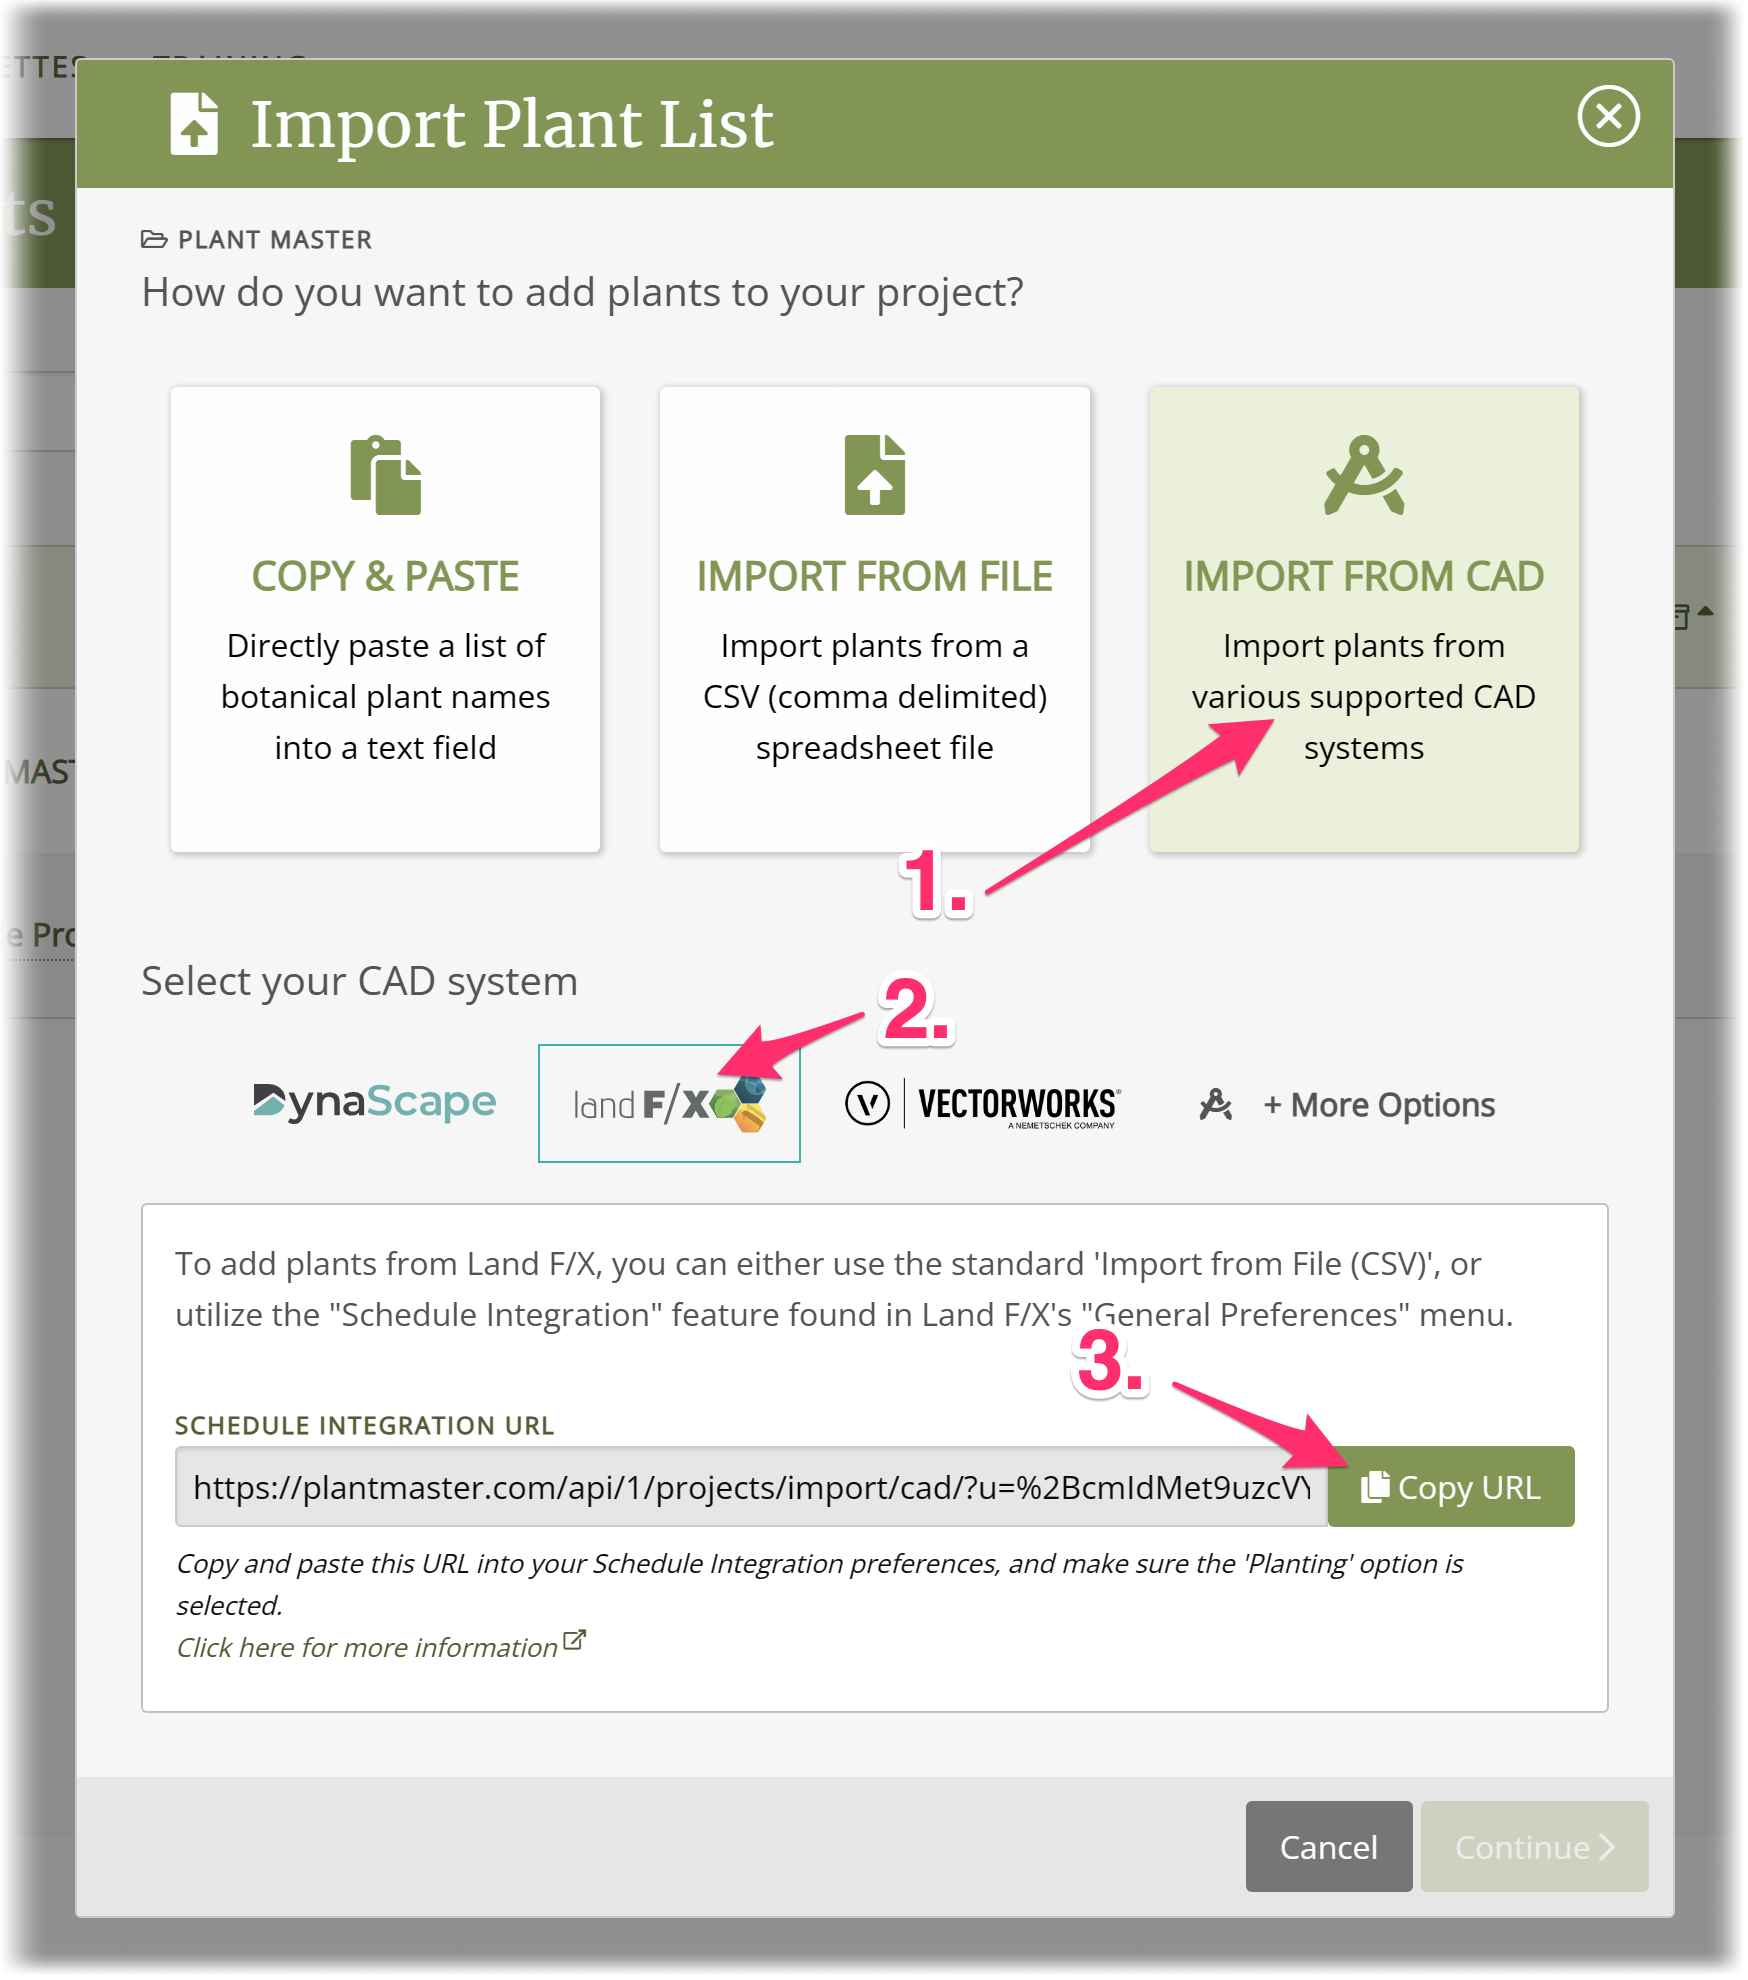 Import Plant List screen whowing Import from CAD and Land F/X buttons, and Schedule Integration URL with Copy URL button